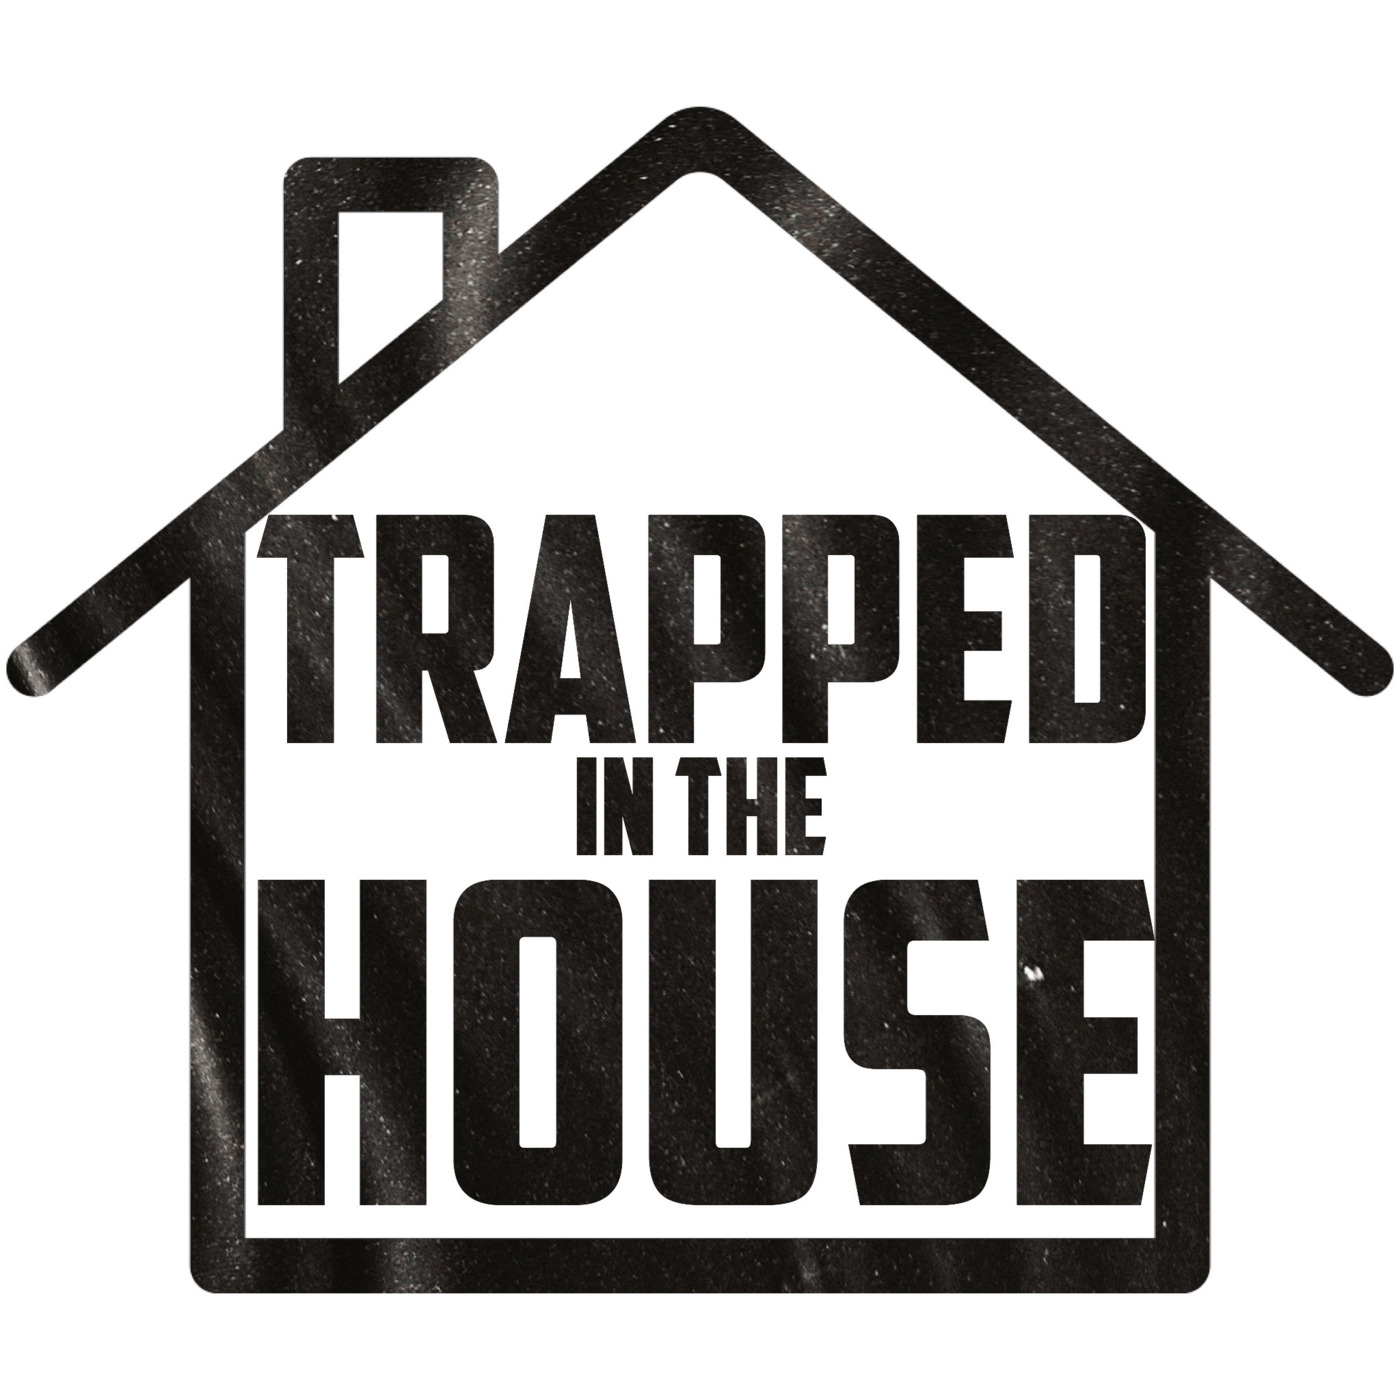 Episode 86: MIKEY GALLAGHER TRAPPED IN THE HOUSE 22-09